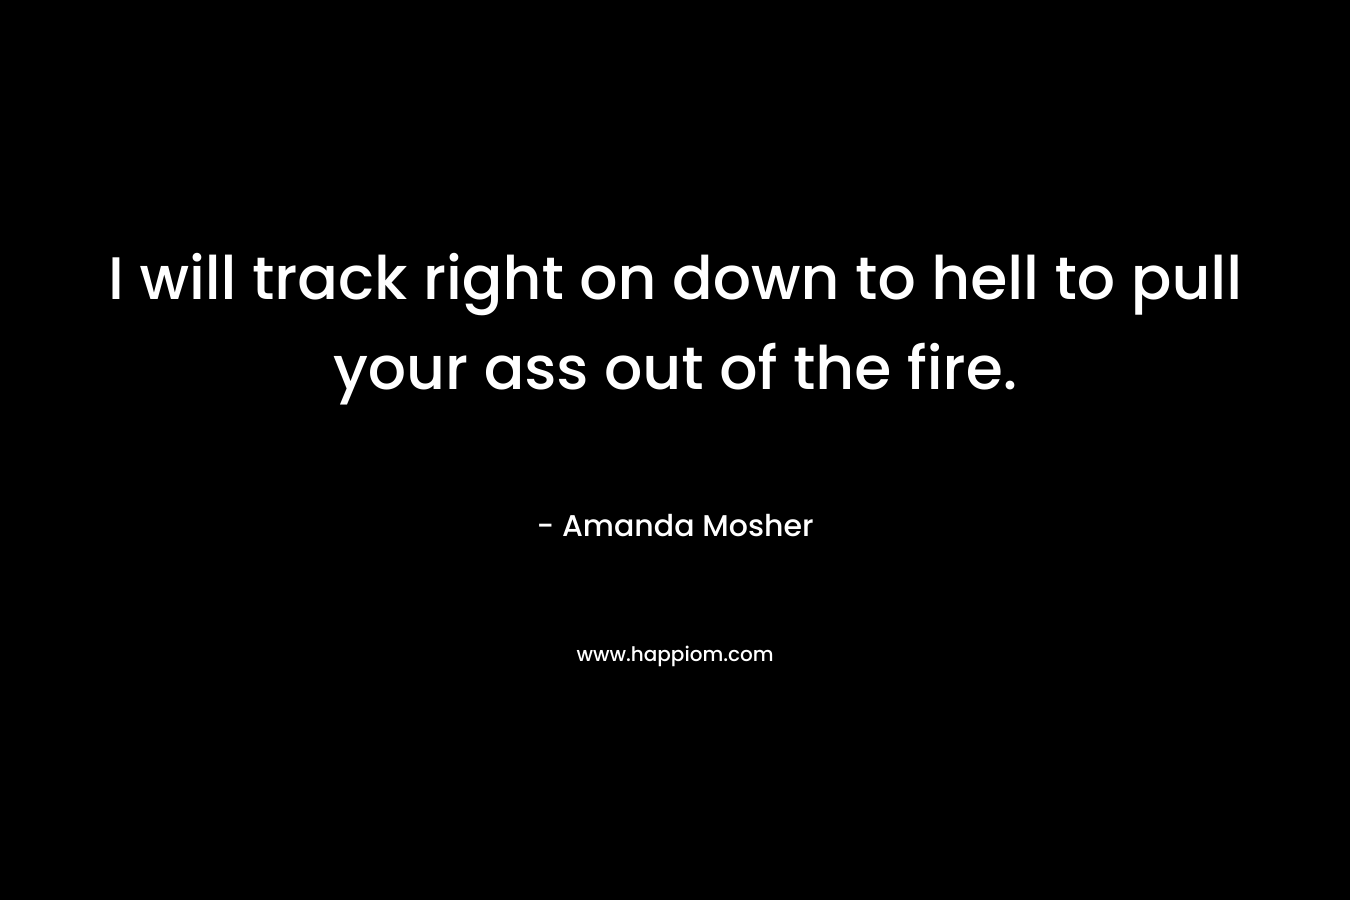 I will track right on down to hell to pull your ass out of the fire.